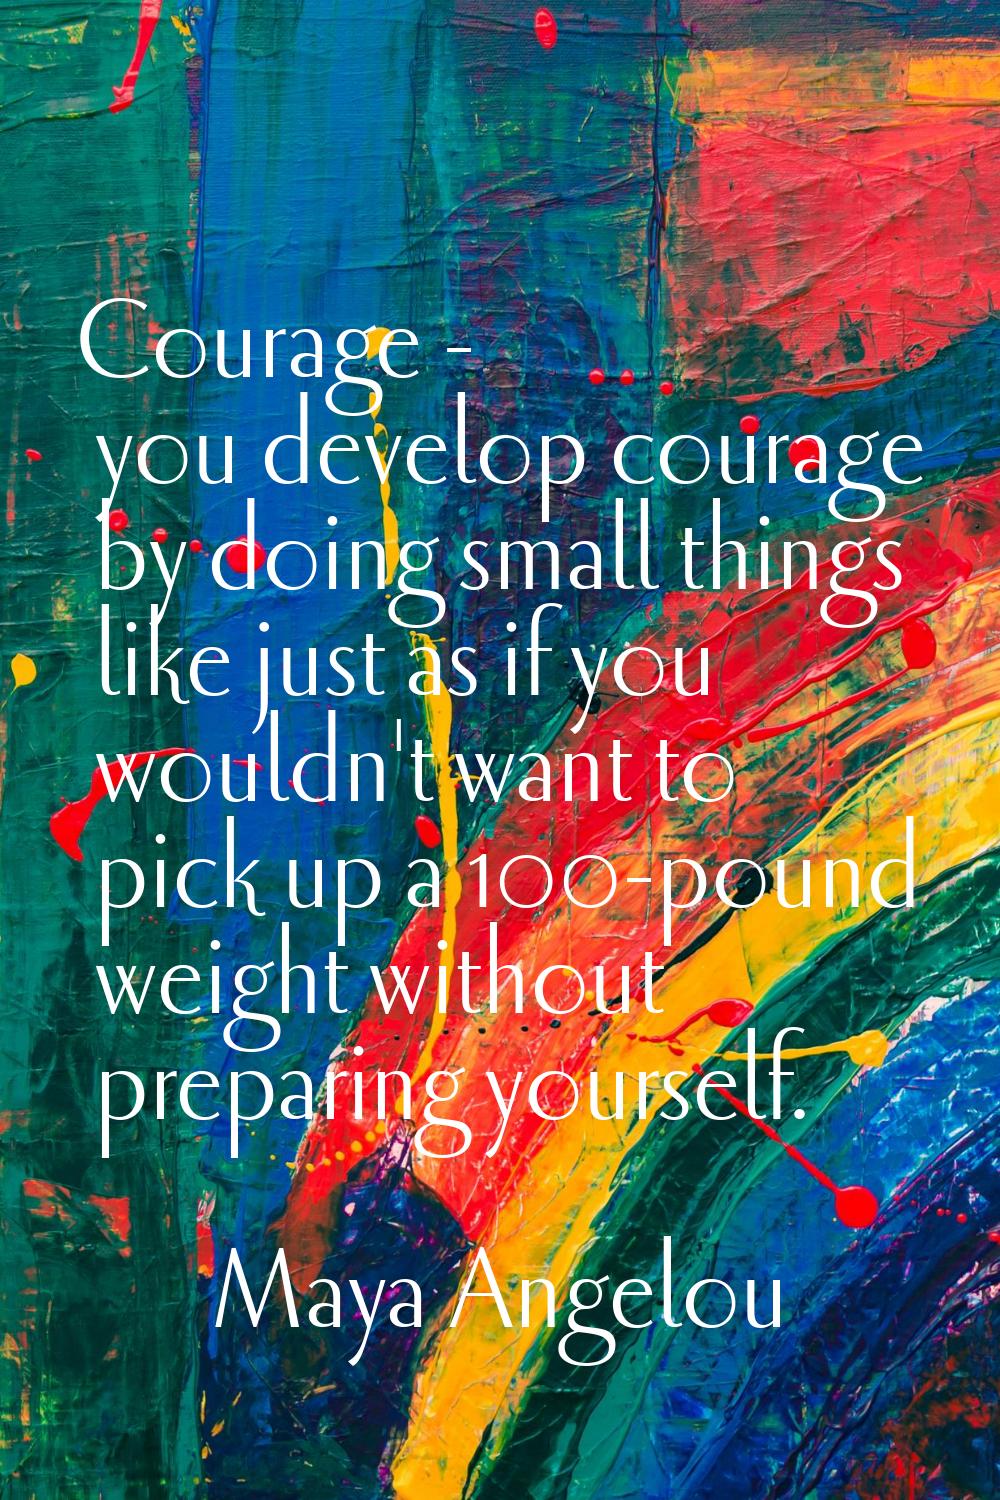 Courage - you develop courage by doing small things like just as if you wouldn't want to pick up a 